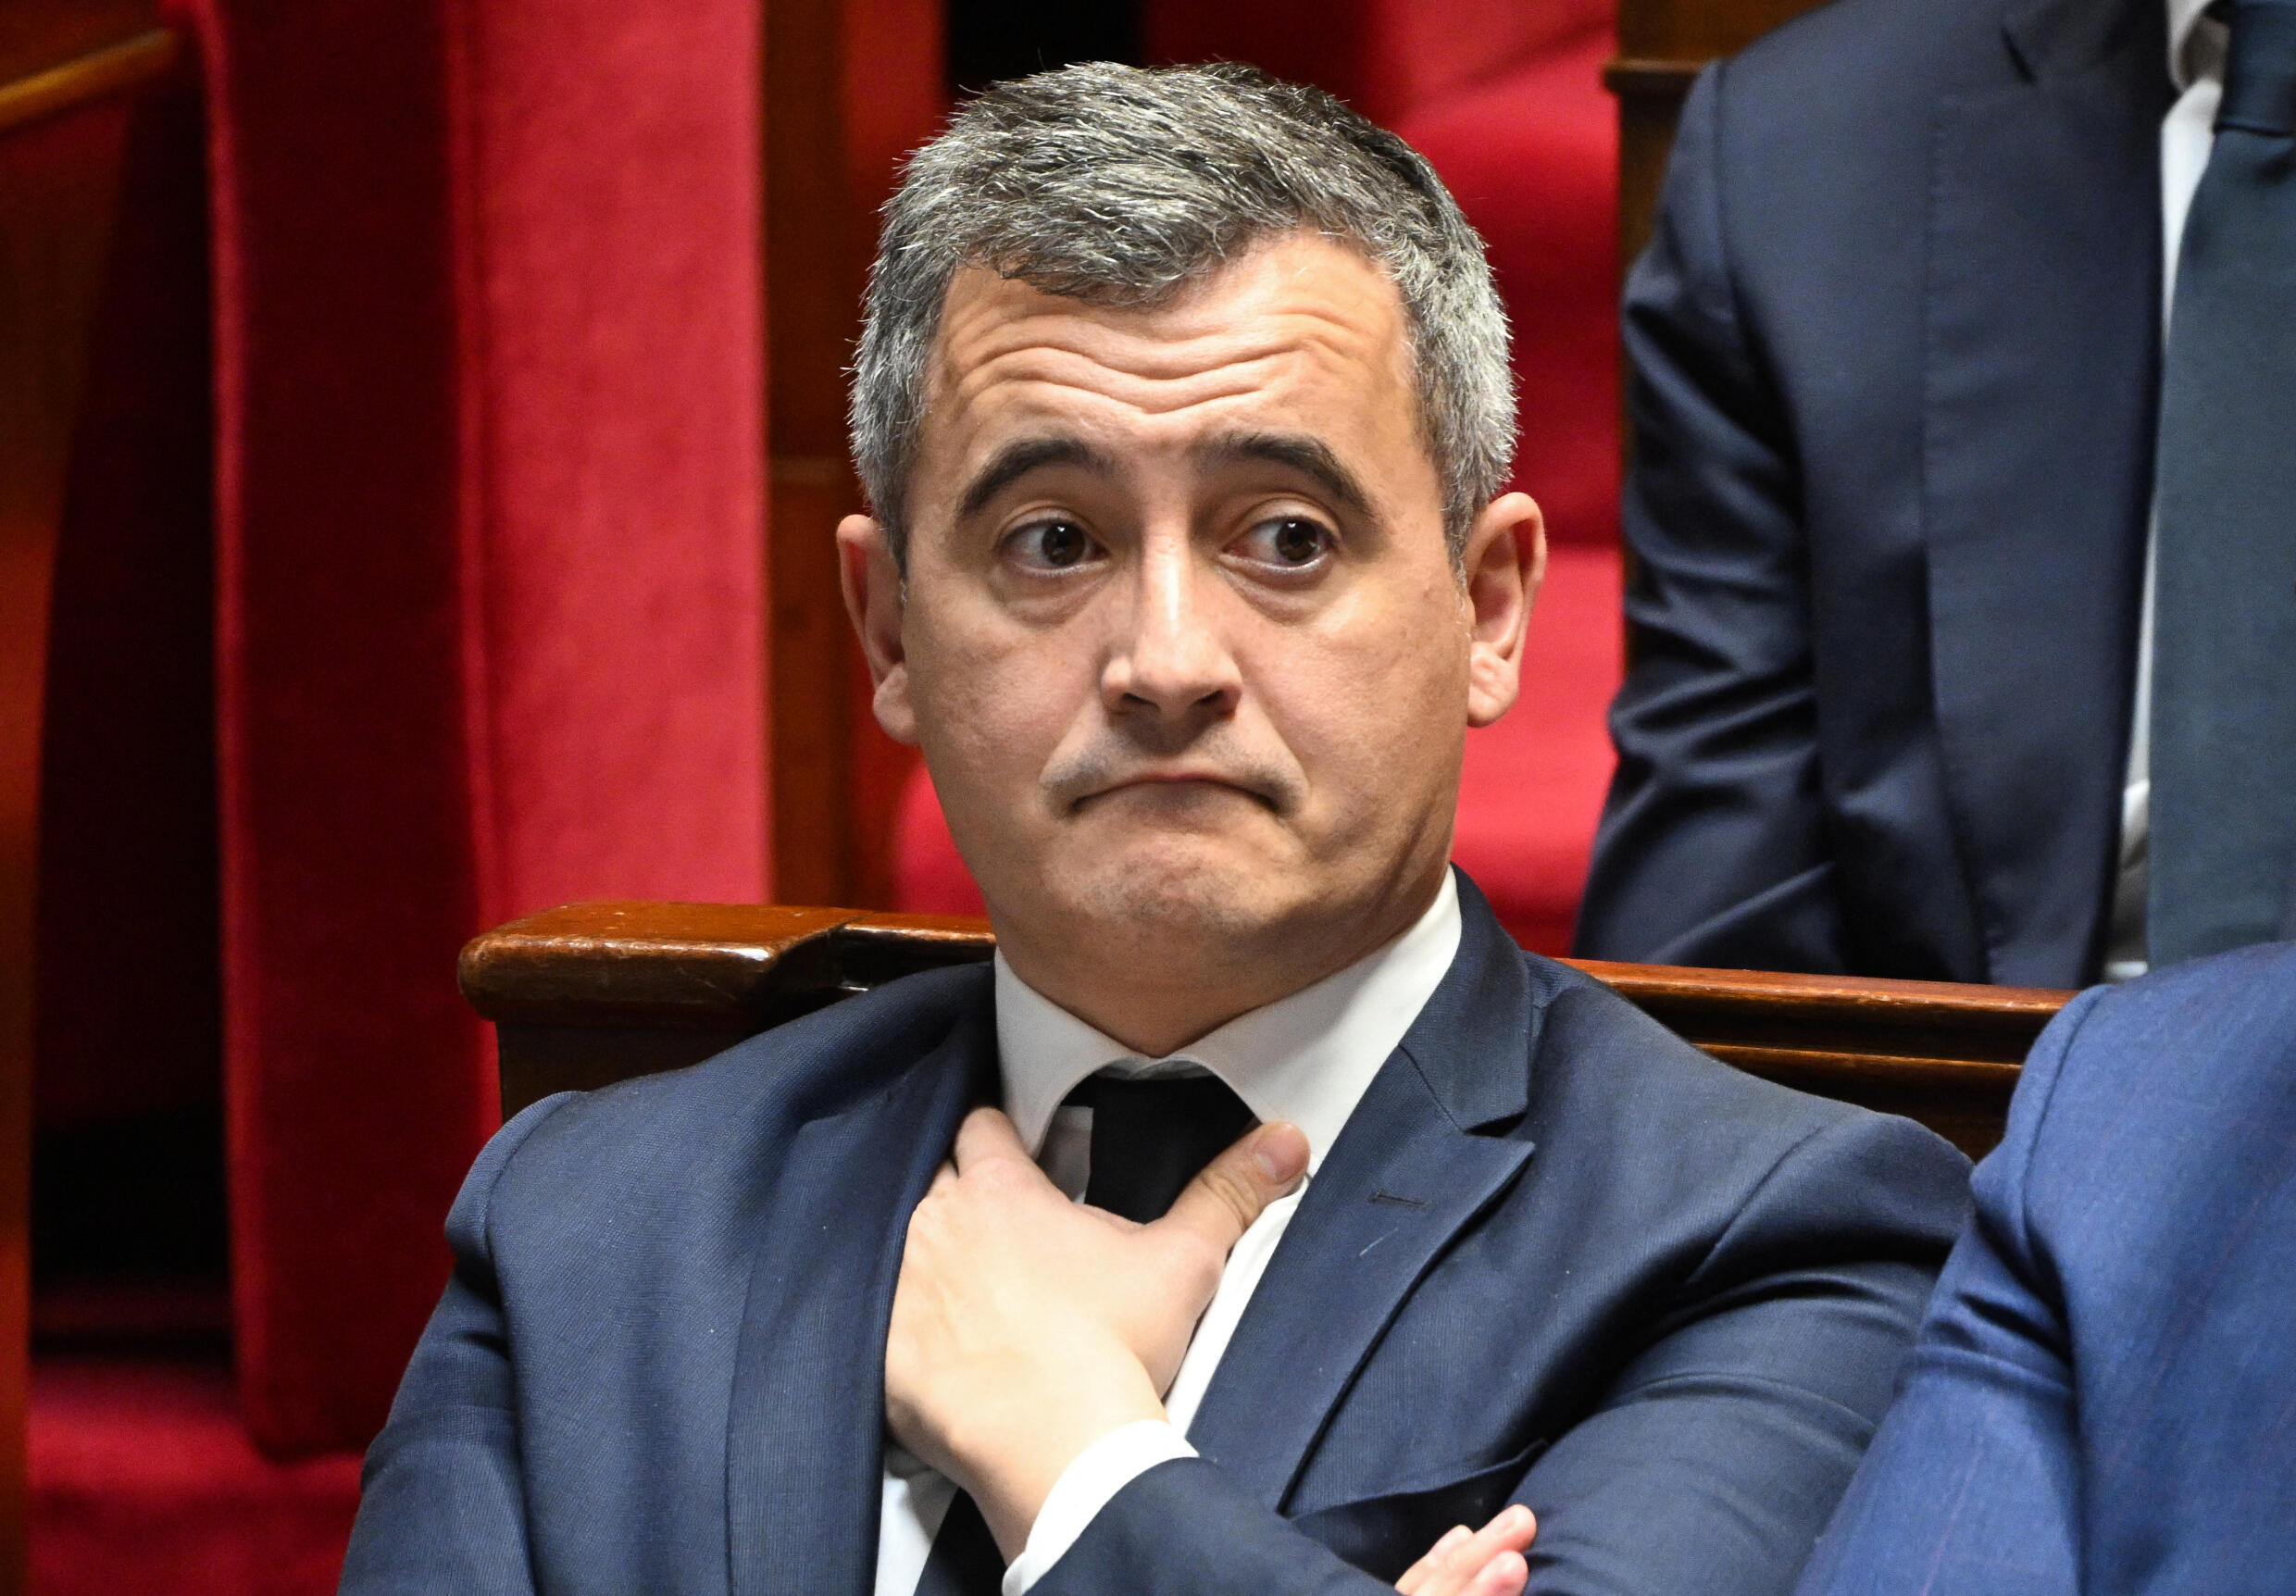 French Interior Minister Gerald Darmanin spent much of the year trying to build support in parliament for a tough new immigration law.